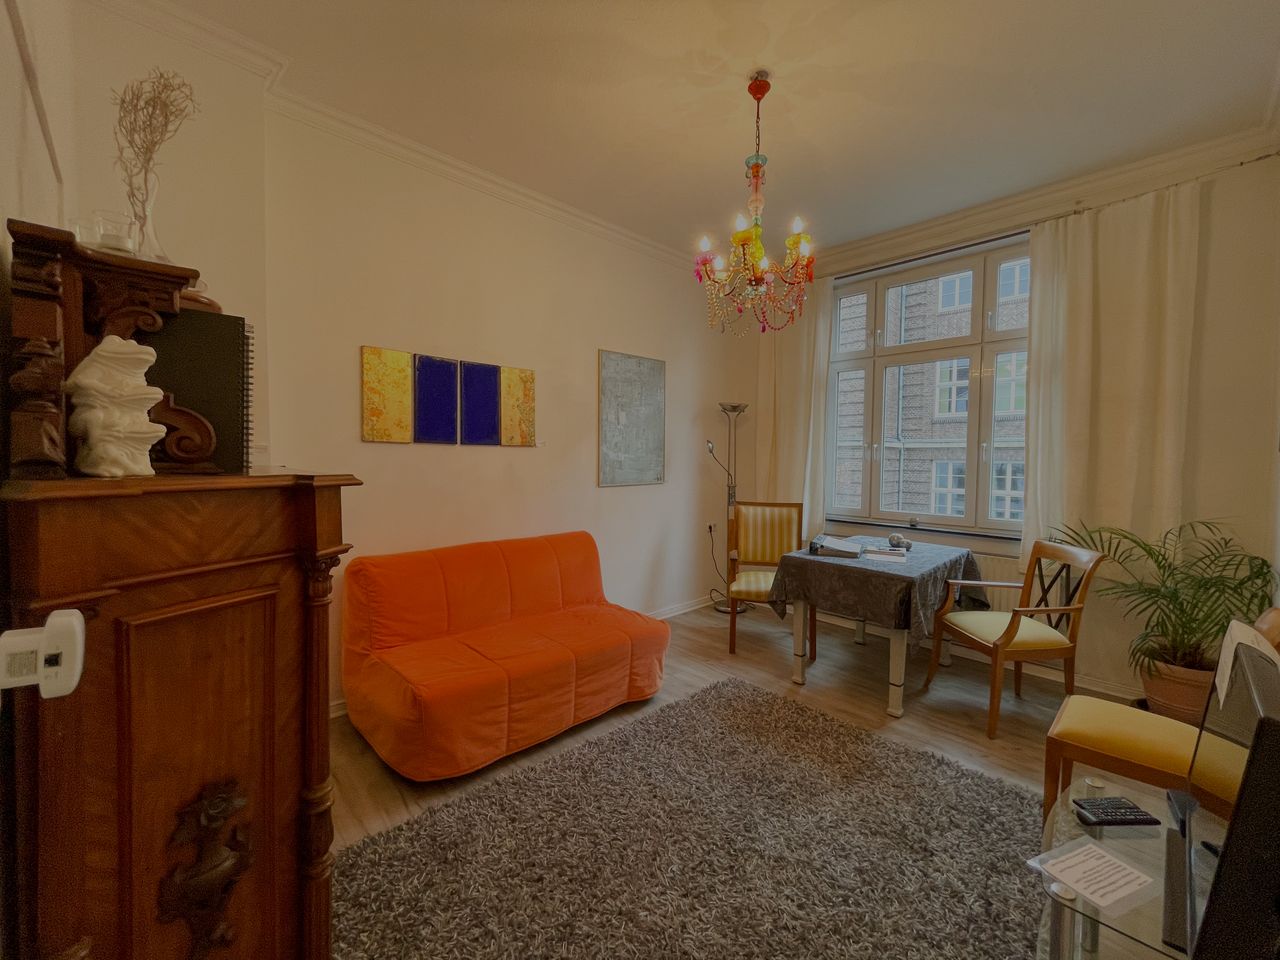 Lovely furnished apartment located in an old Bremen house